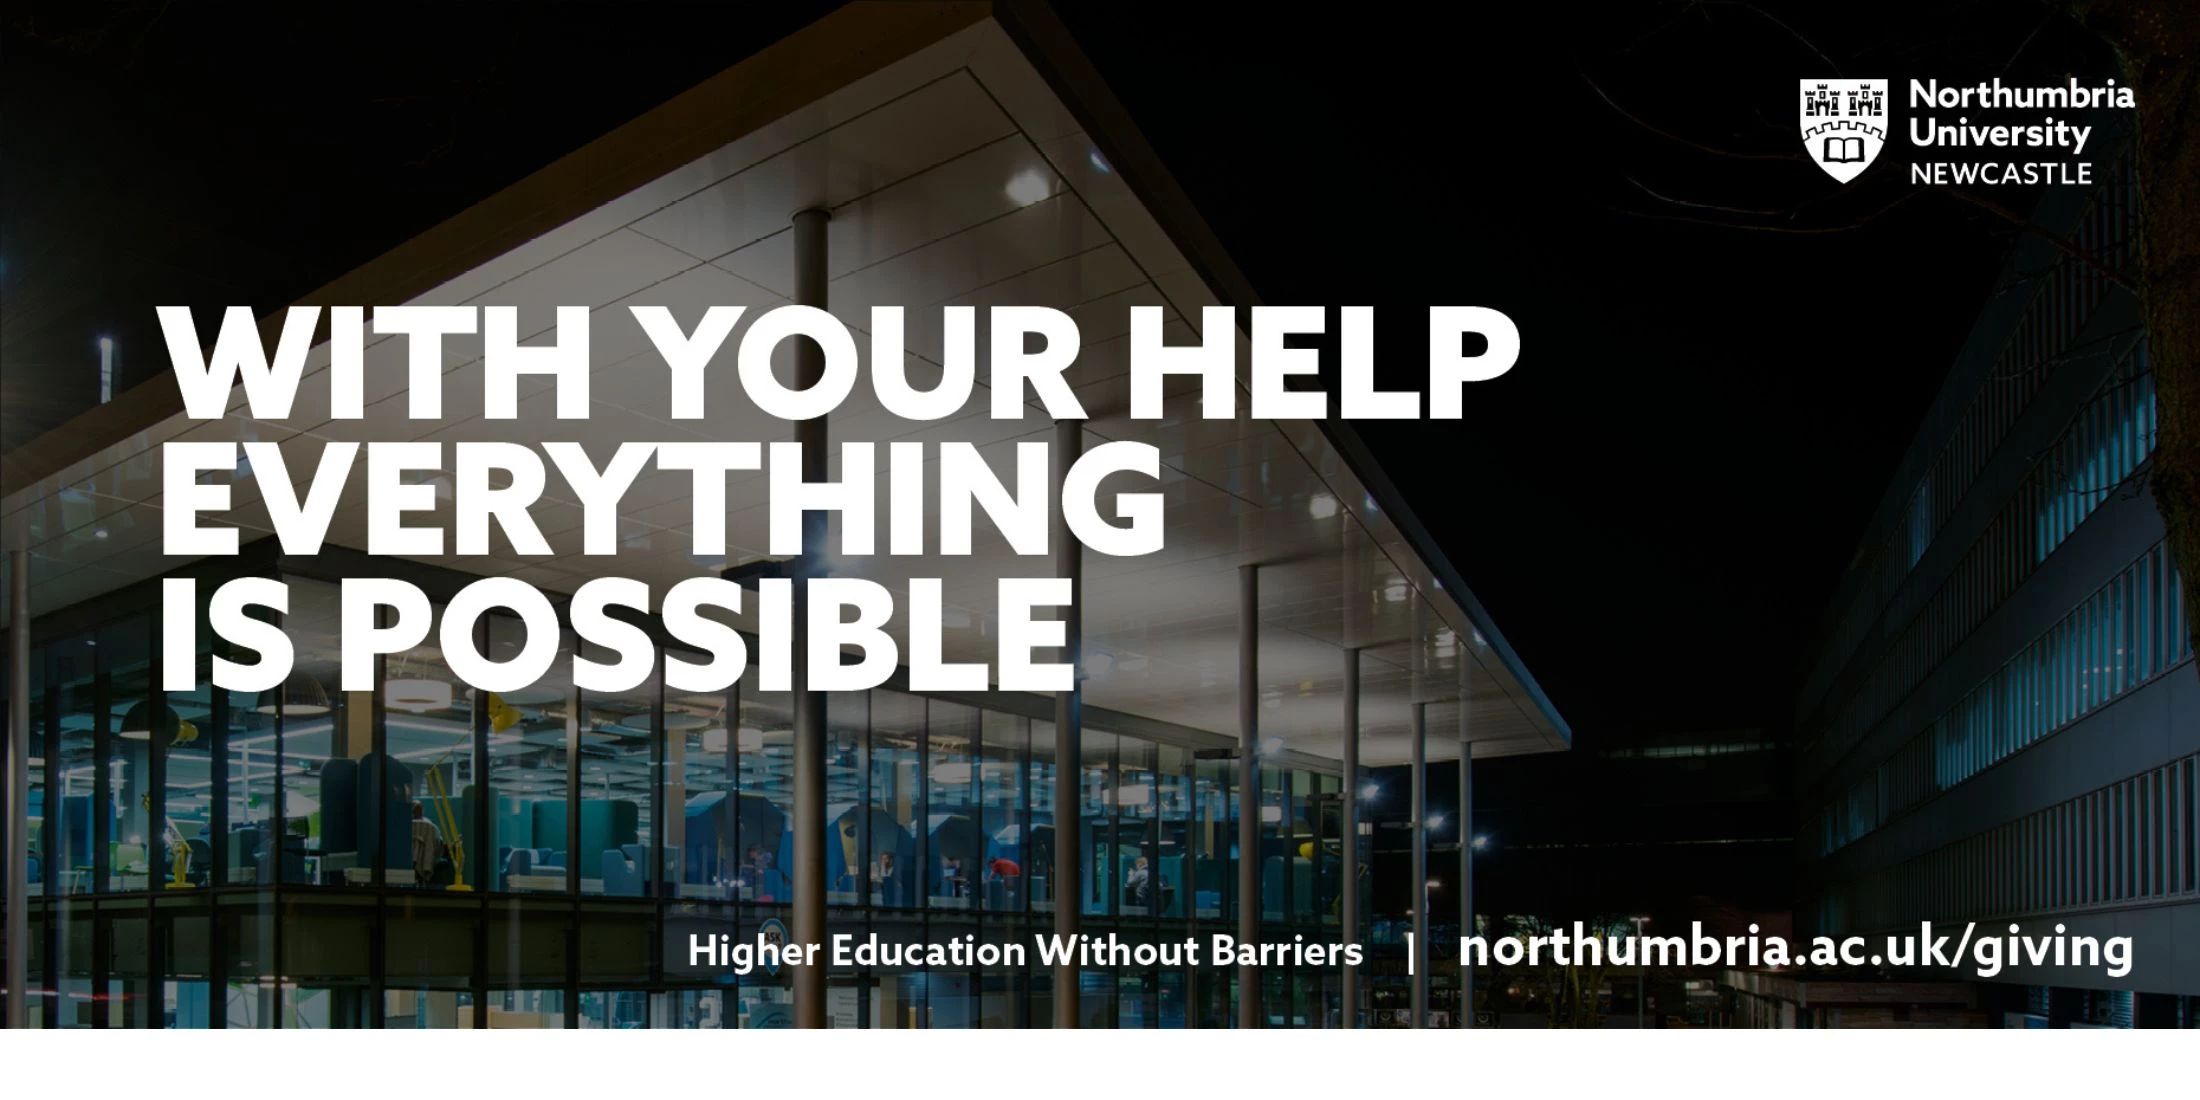 Northumbria University - Higher Education Without Barriers